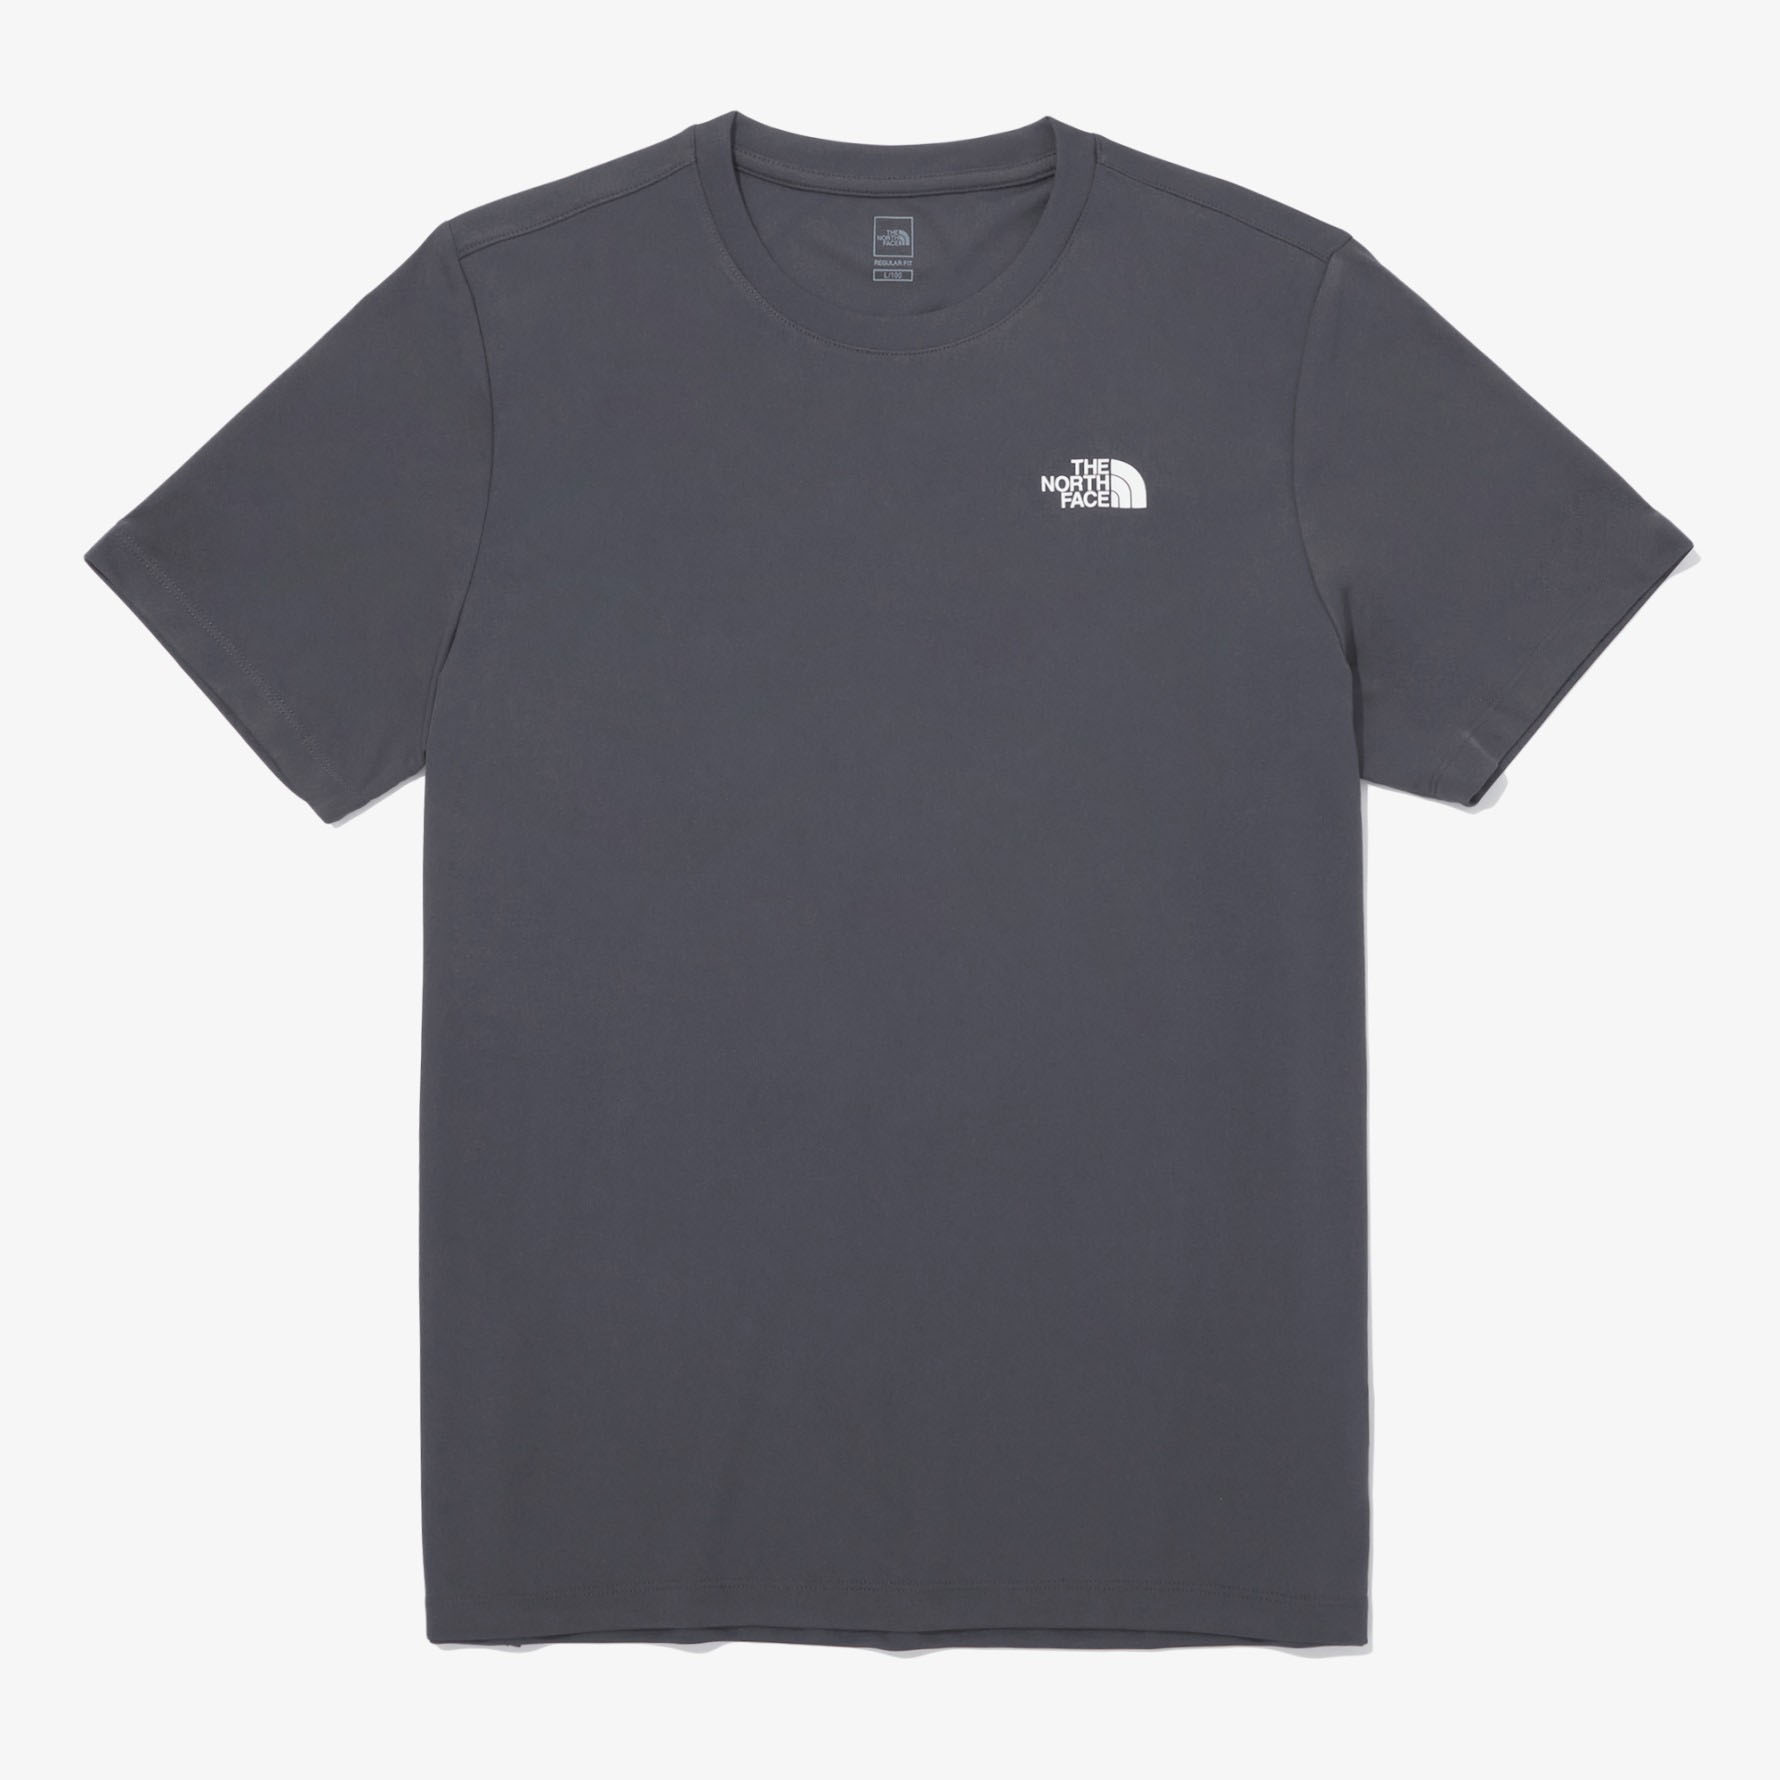 THE NORTH FACE Tシャツ M'S RECOVERY S/S R/TEE リカバリー 半袖Tシャツ ロゴT ベーシックフィット NAVY KHAKI CHARCOAL BLUE BLACK 半袖 NT7UQ06A/B/C/D/E｜a-dot｜04